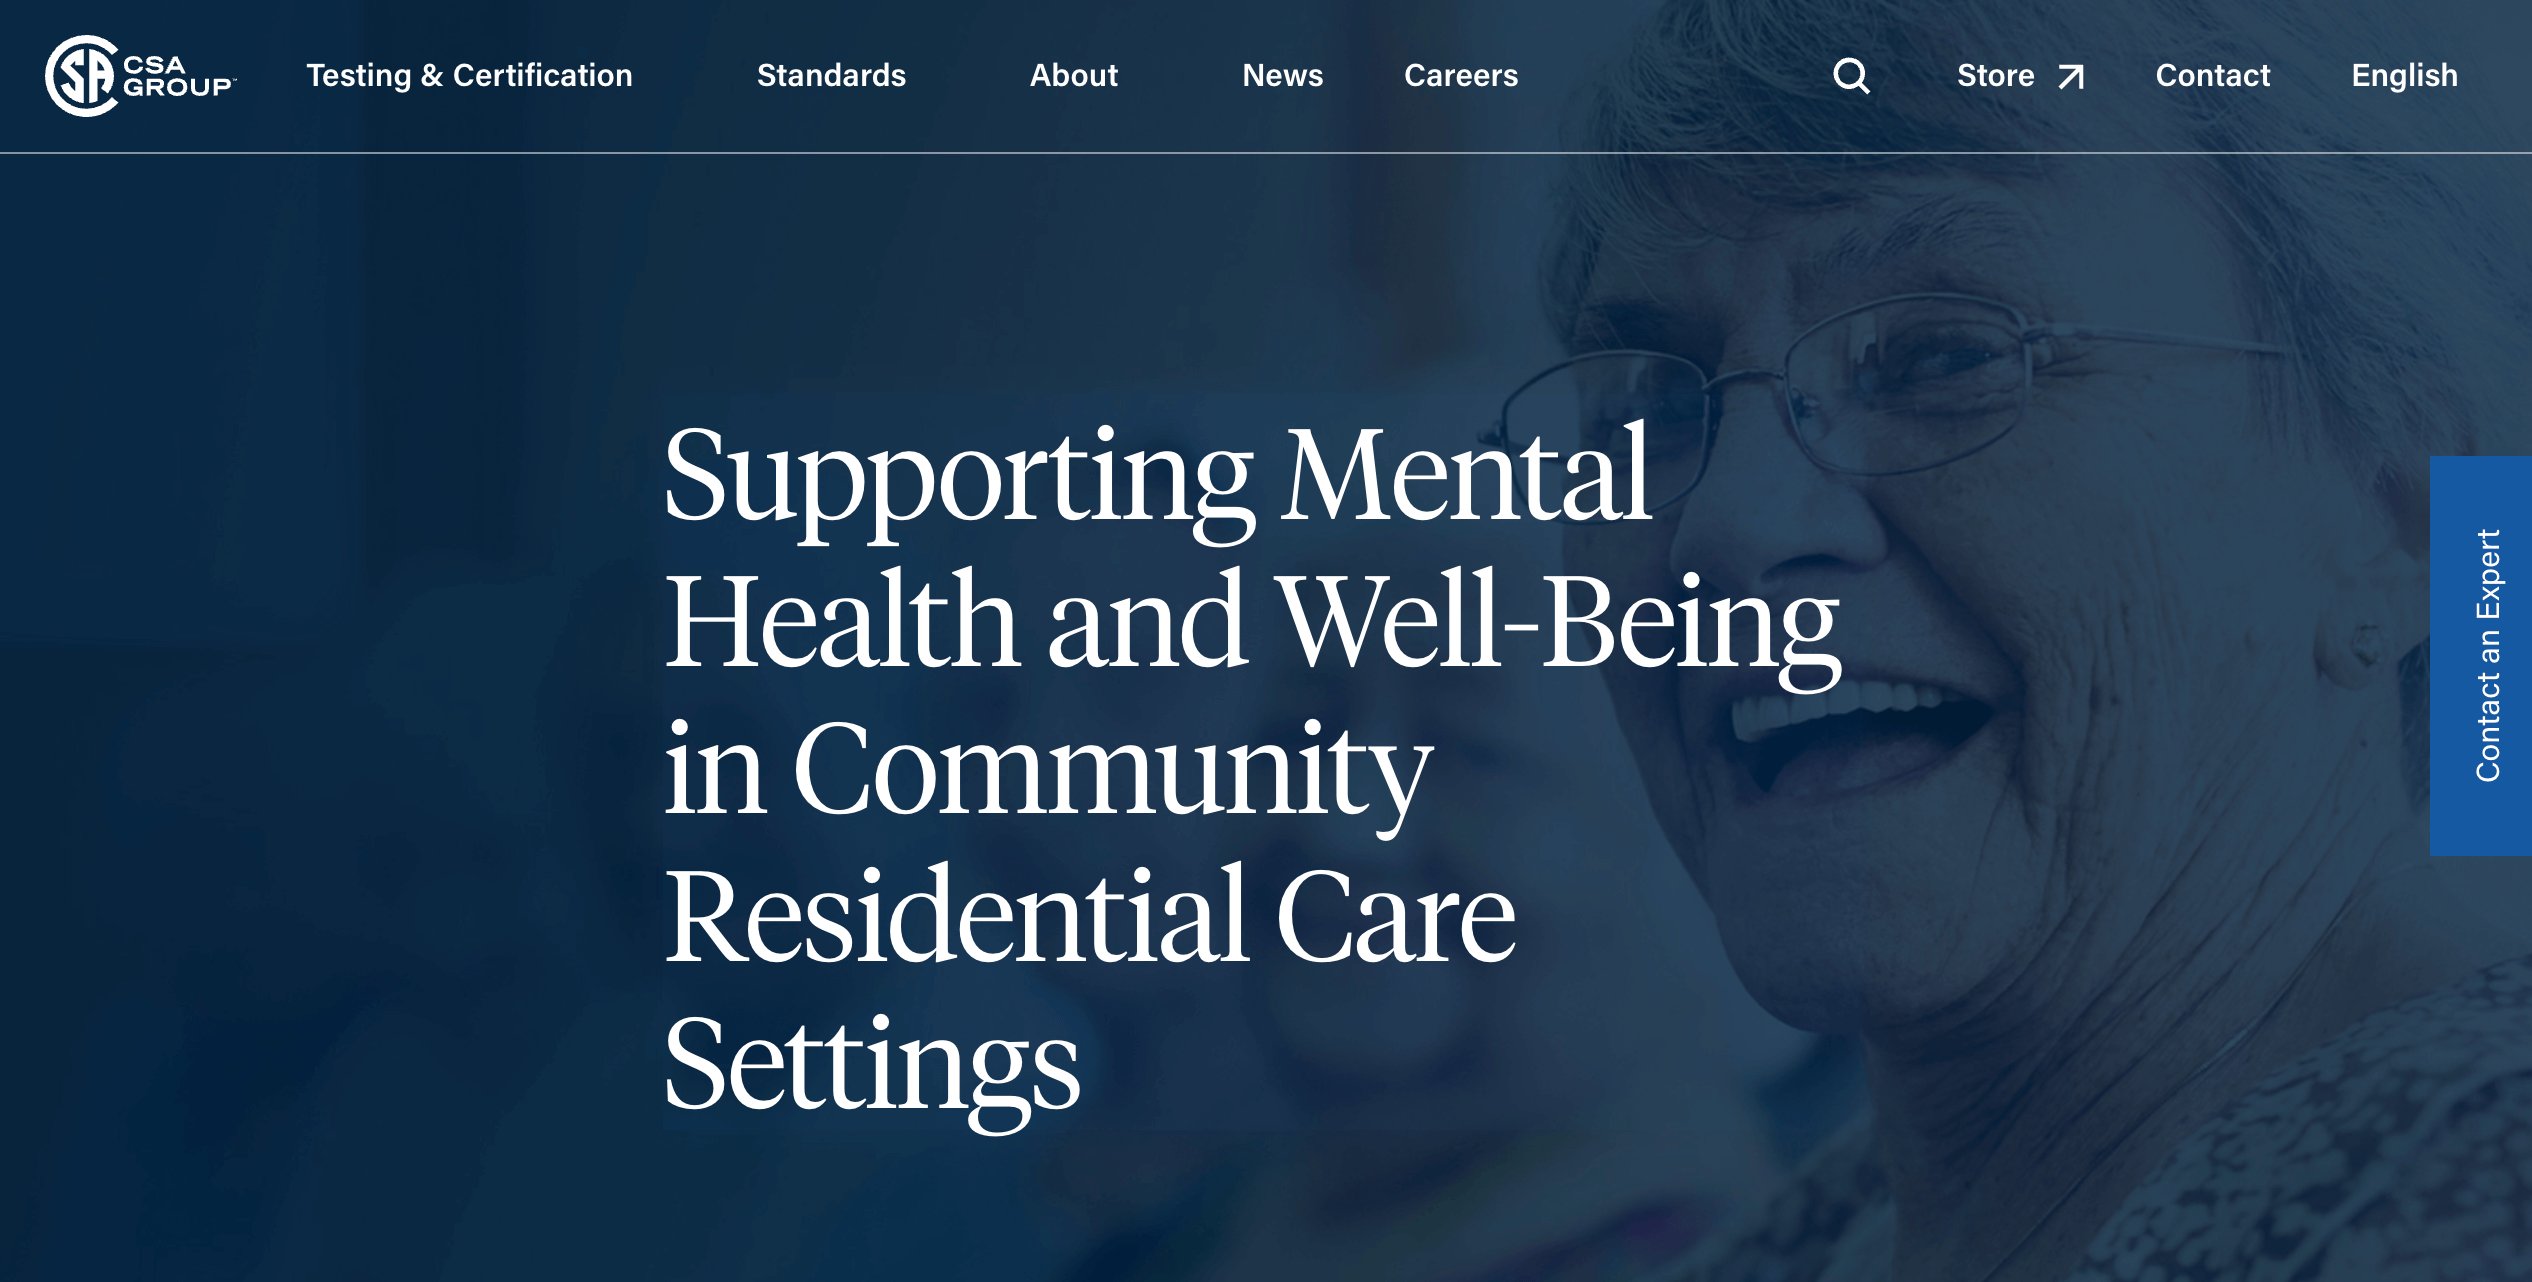 Screen captur image of the CSA Group website homepage which is predominantly dark blue with a transparent image of a happy and smiling older adult woman.